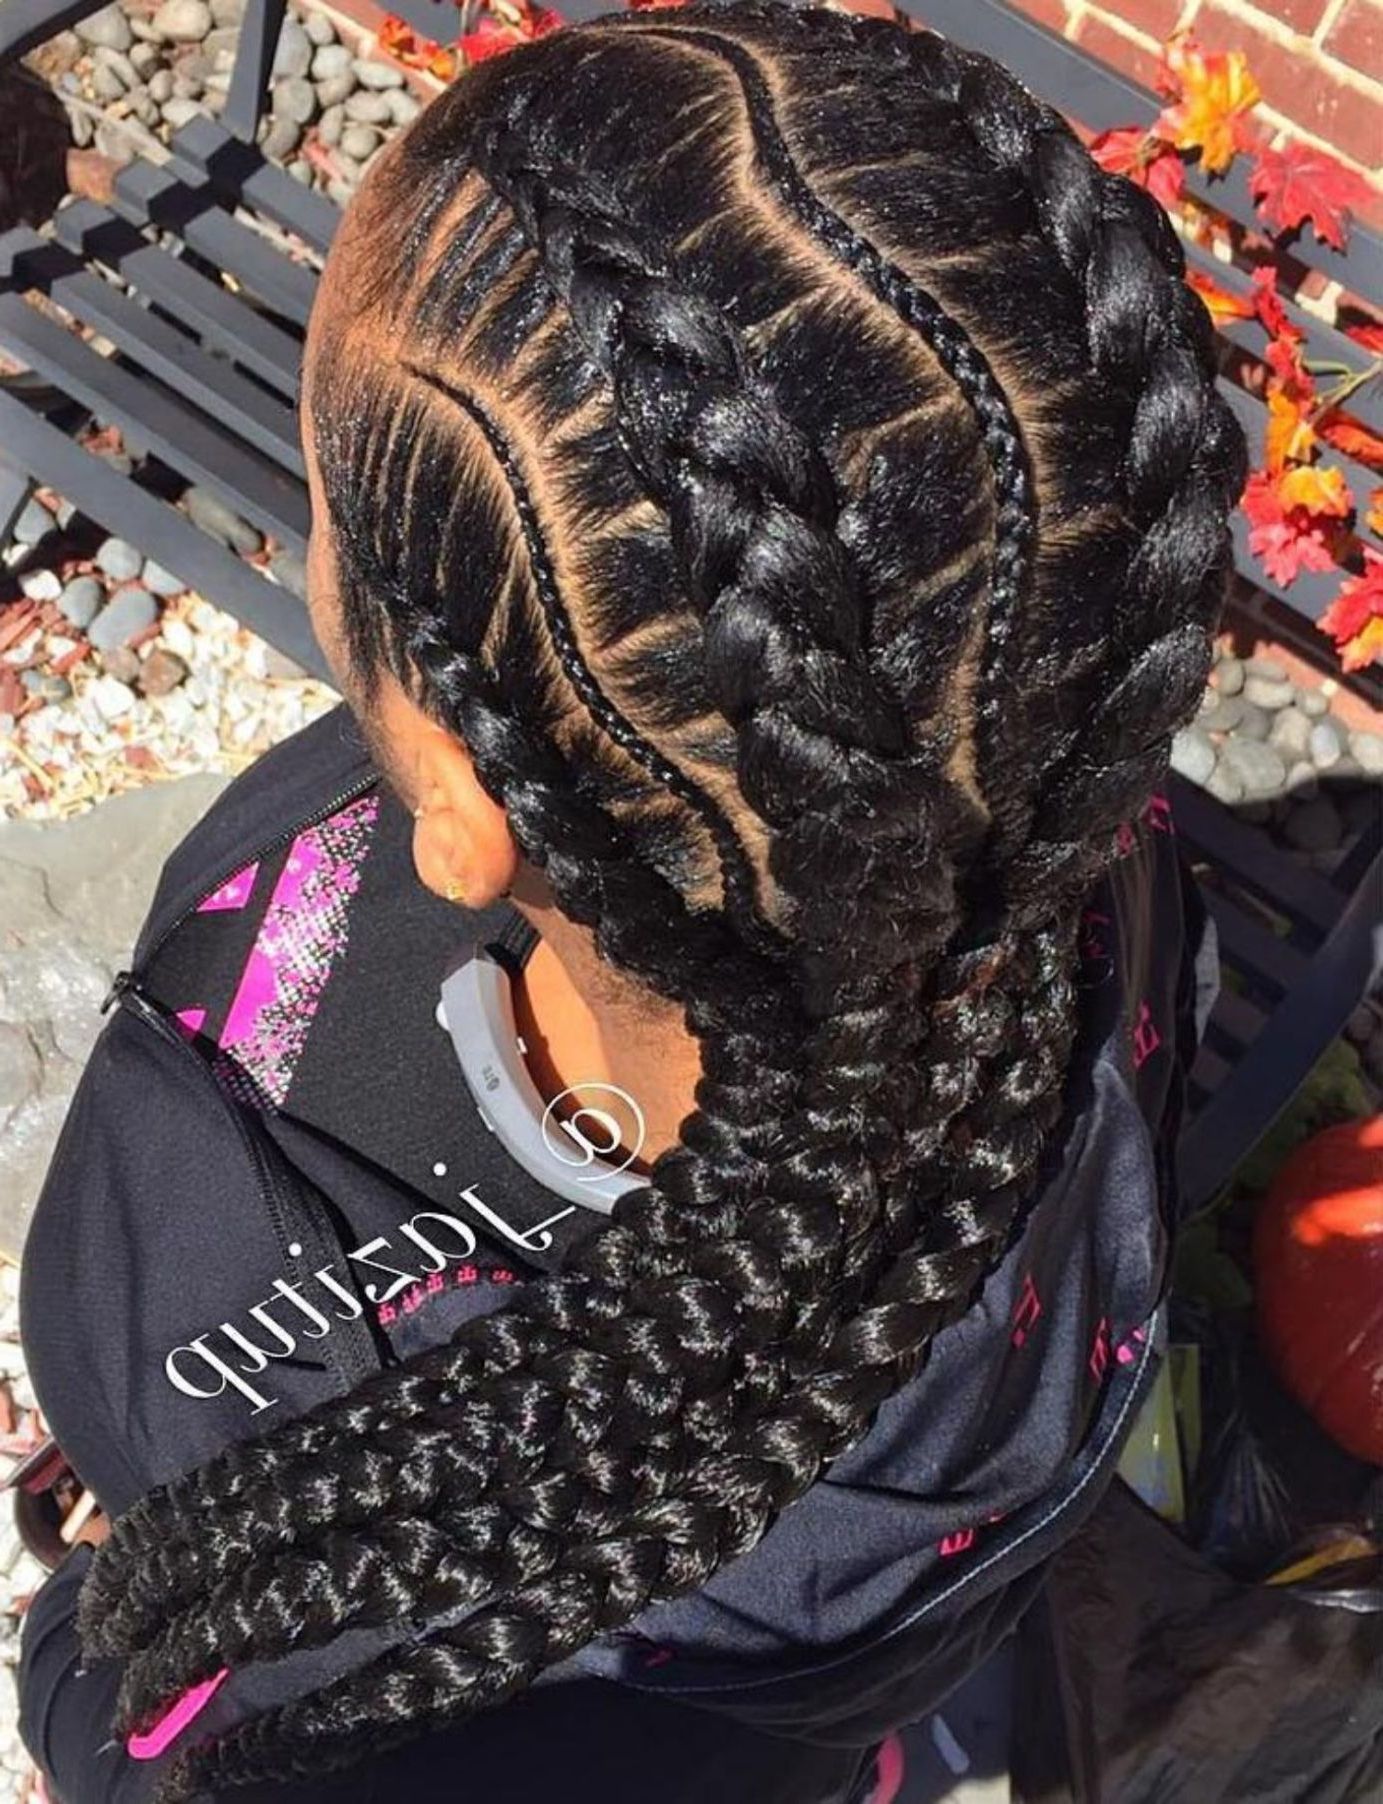 70 Best Black Braided Hairstyles That Turn Heads In 2019 In Famous Ponytail Braid Hairstyles With Thin And Thick Cornrows (View 10 of 20)